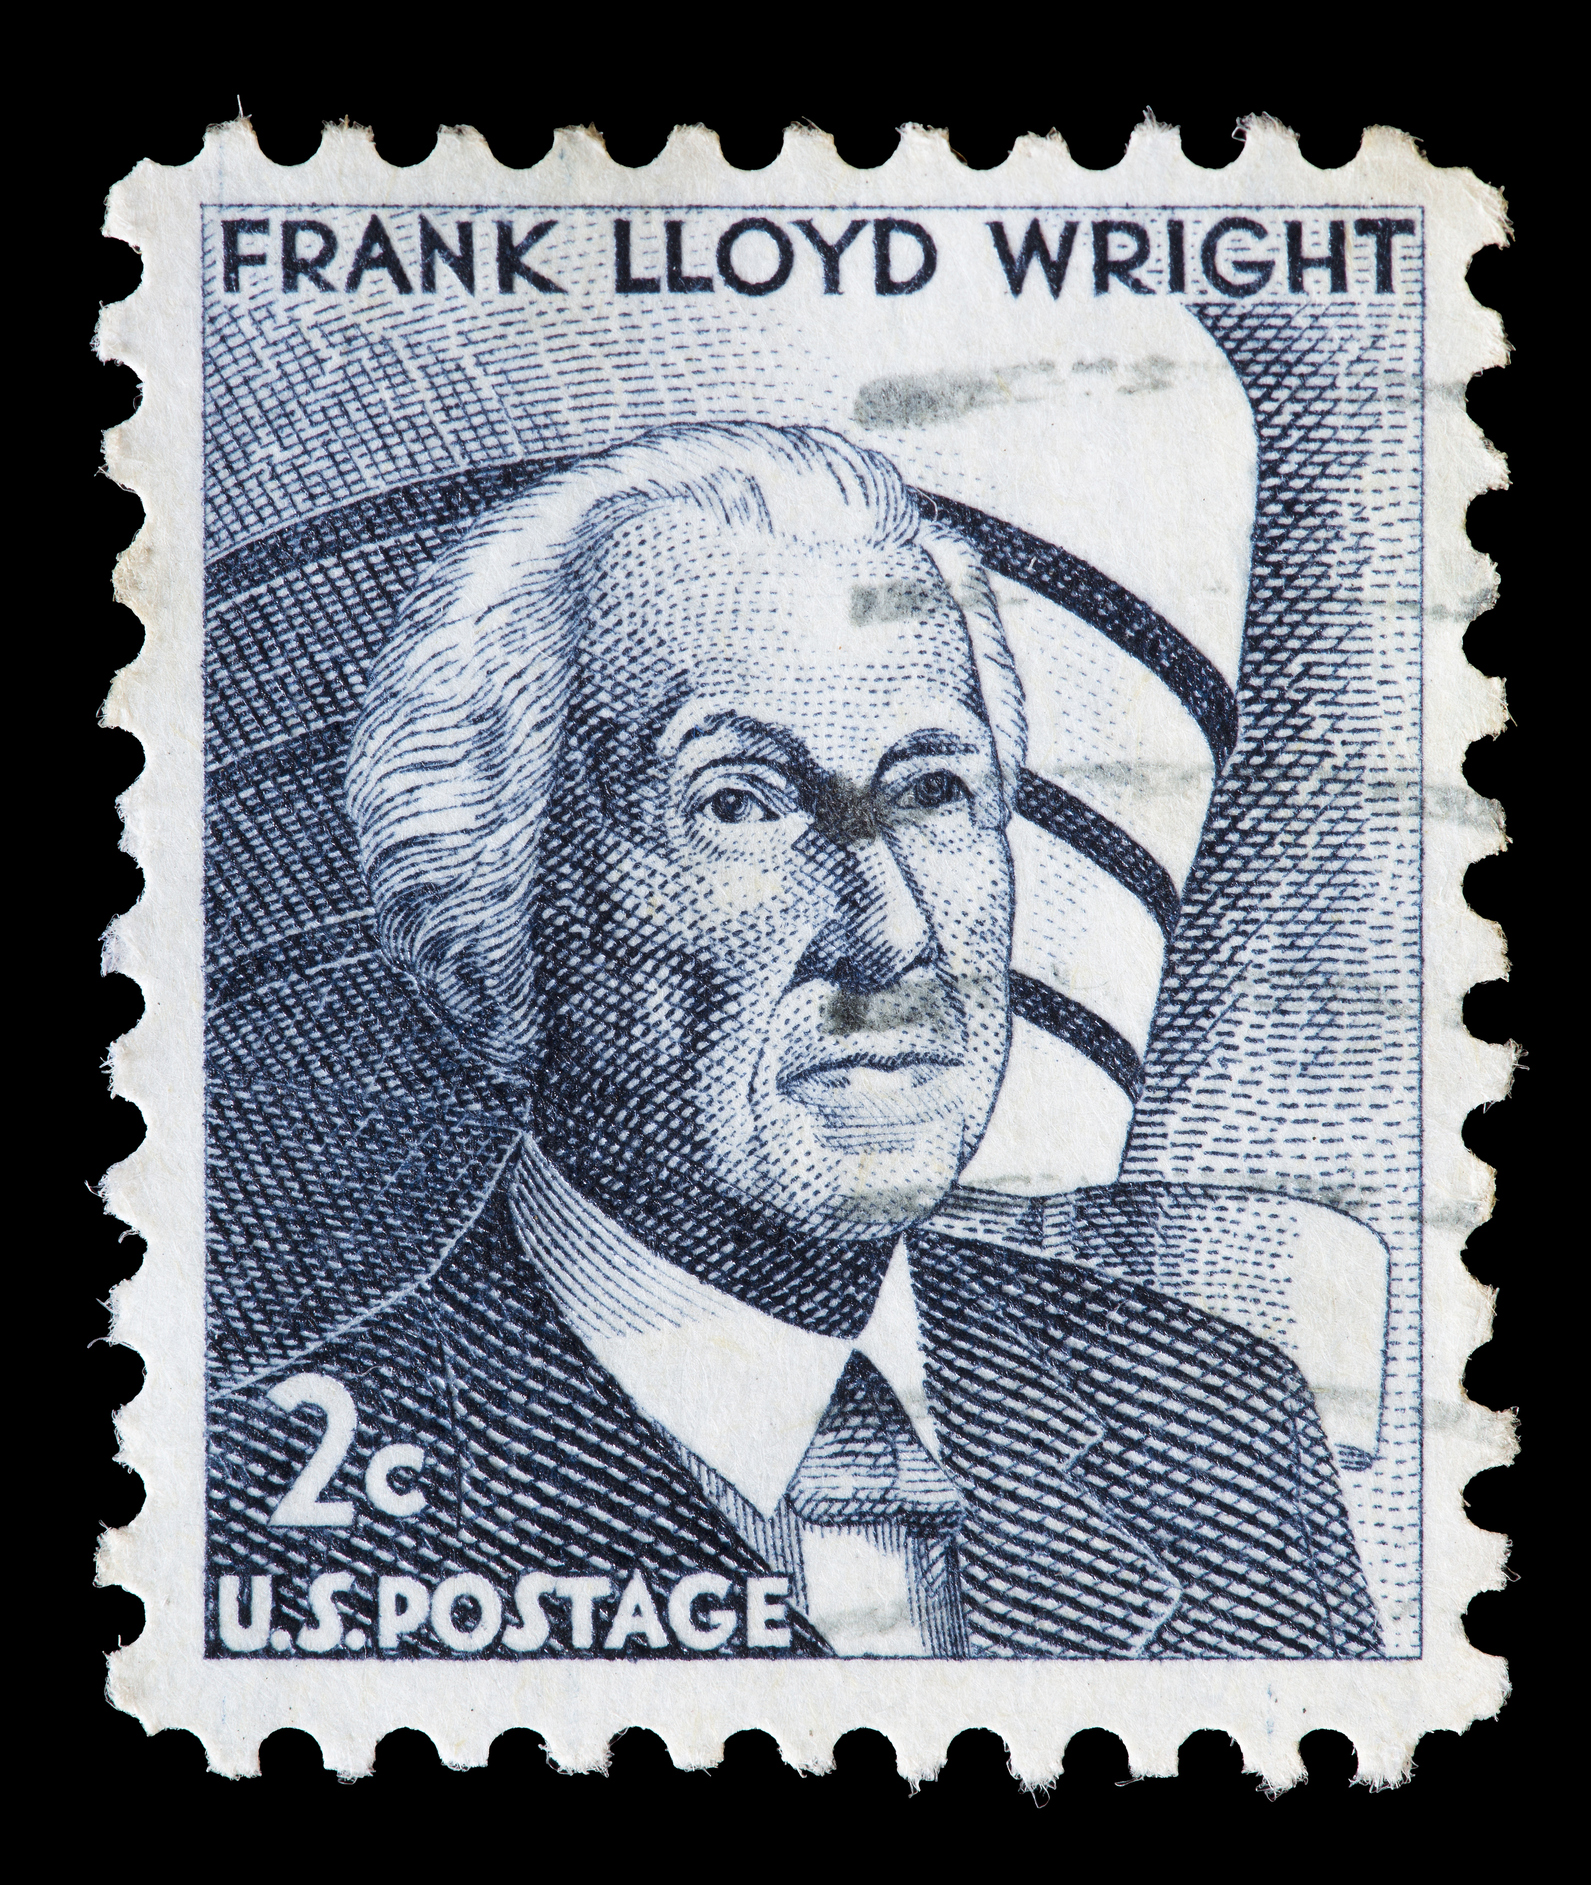 A stamp featuring Frank Lloyd Wright